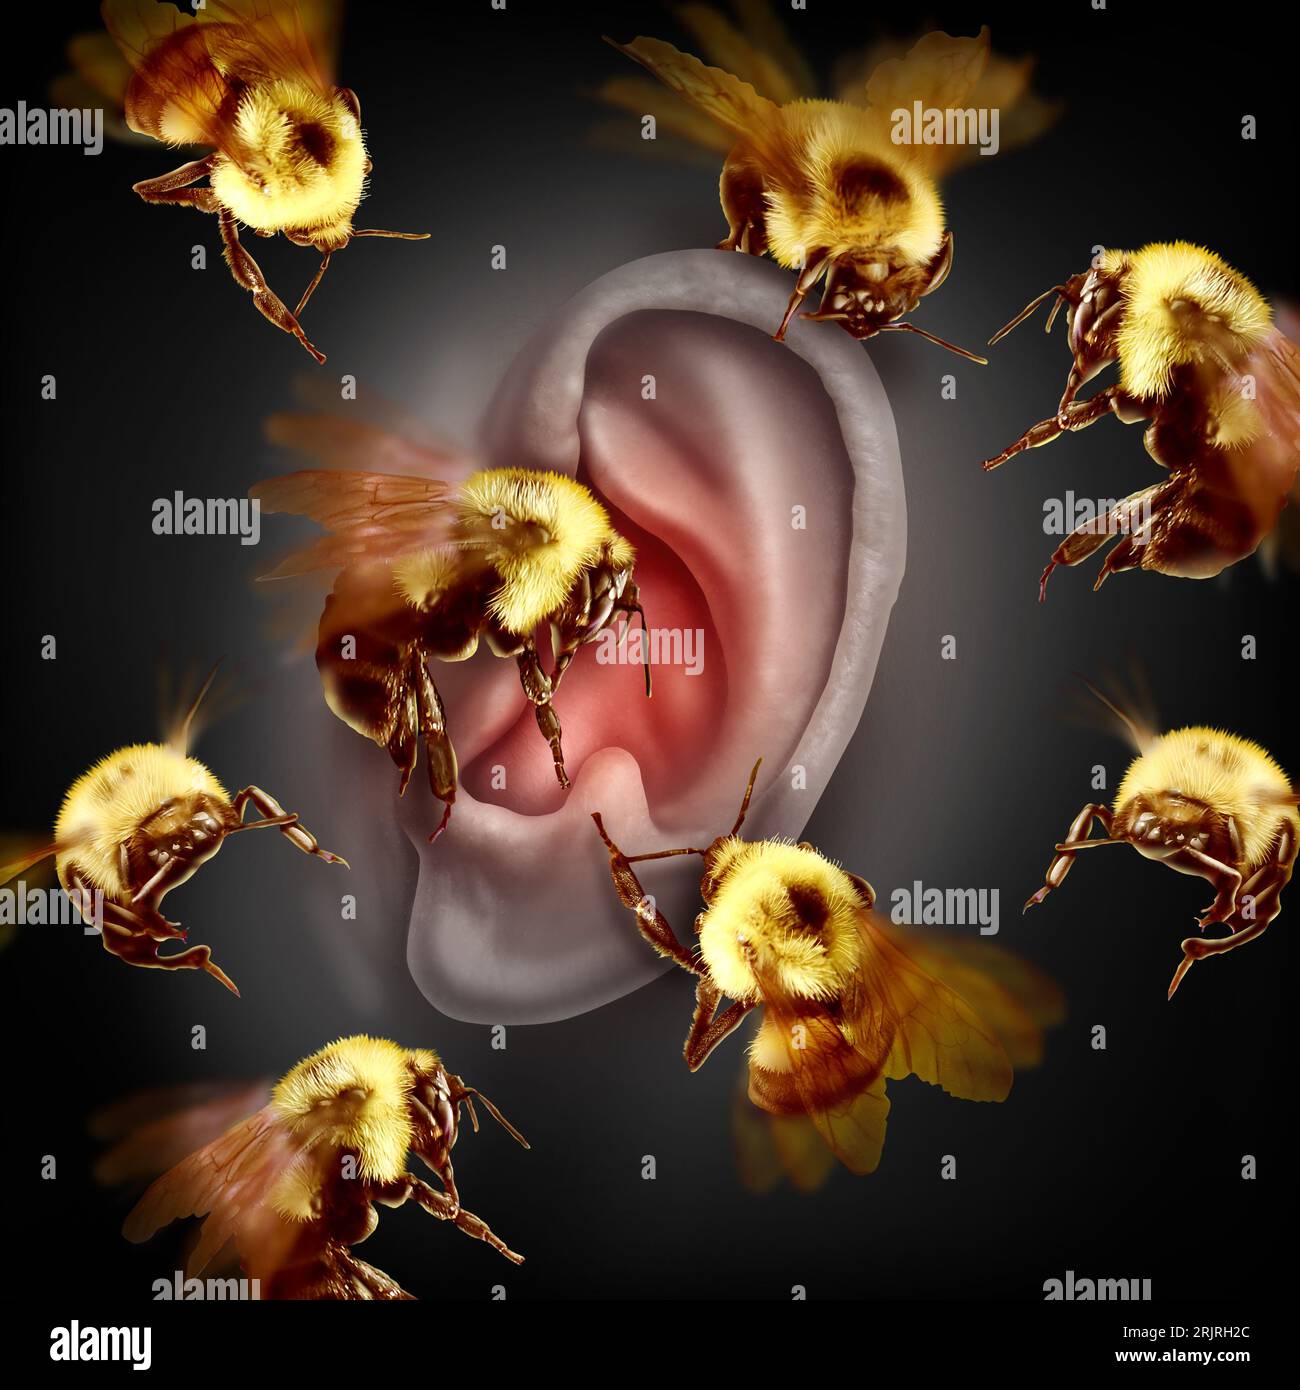 Tinnitus Symptom and ringing in the ear as bees making a buzzing sound as a medical symptom and diagnosis of hearing loss. Stock Photo